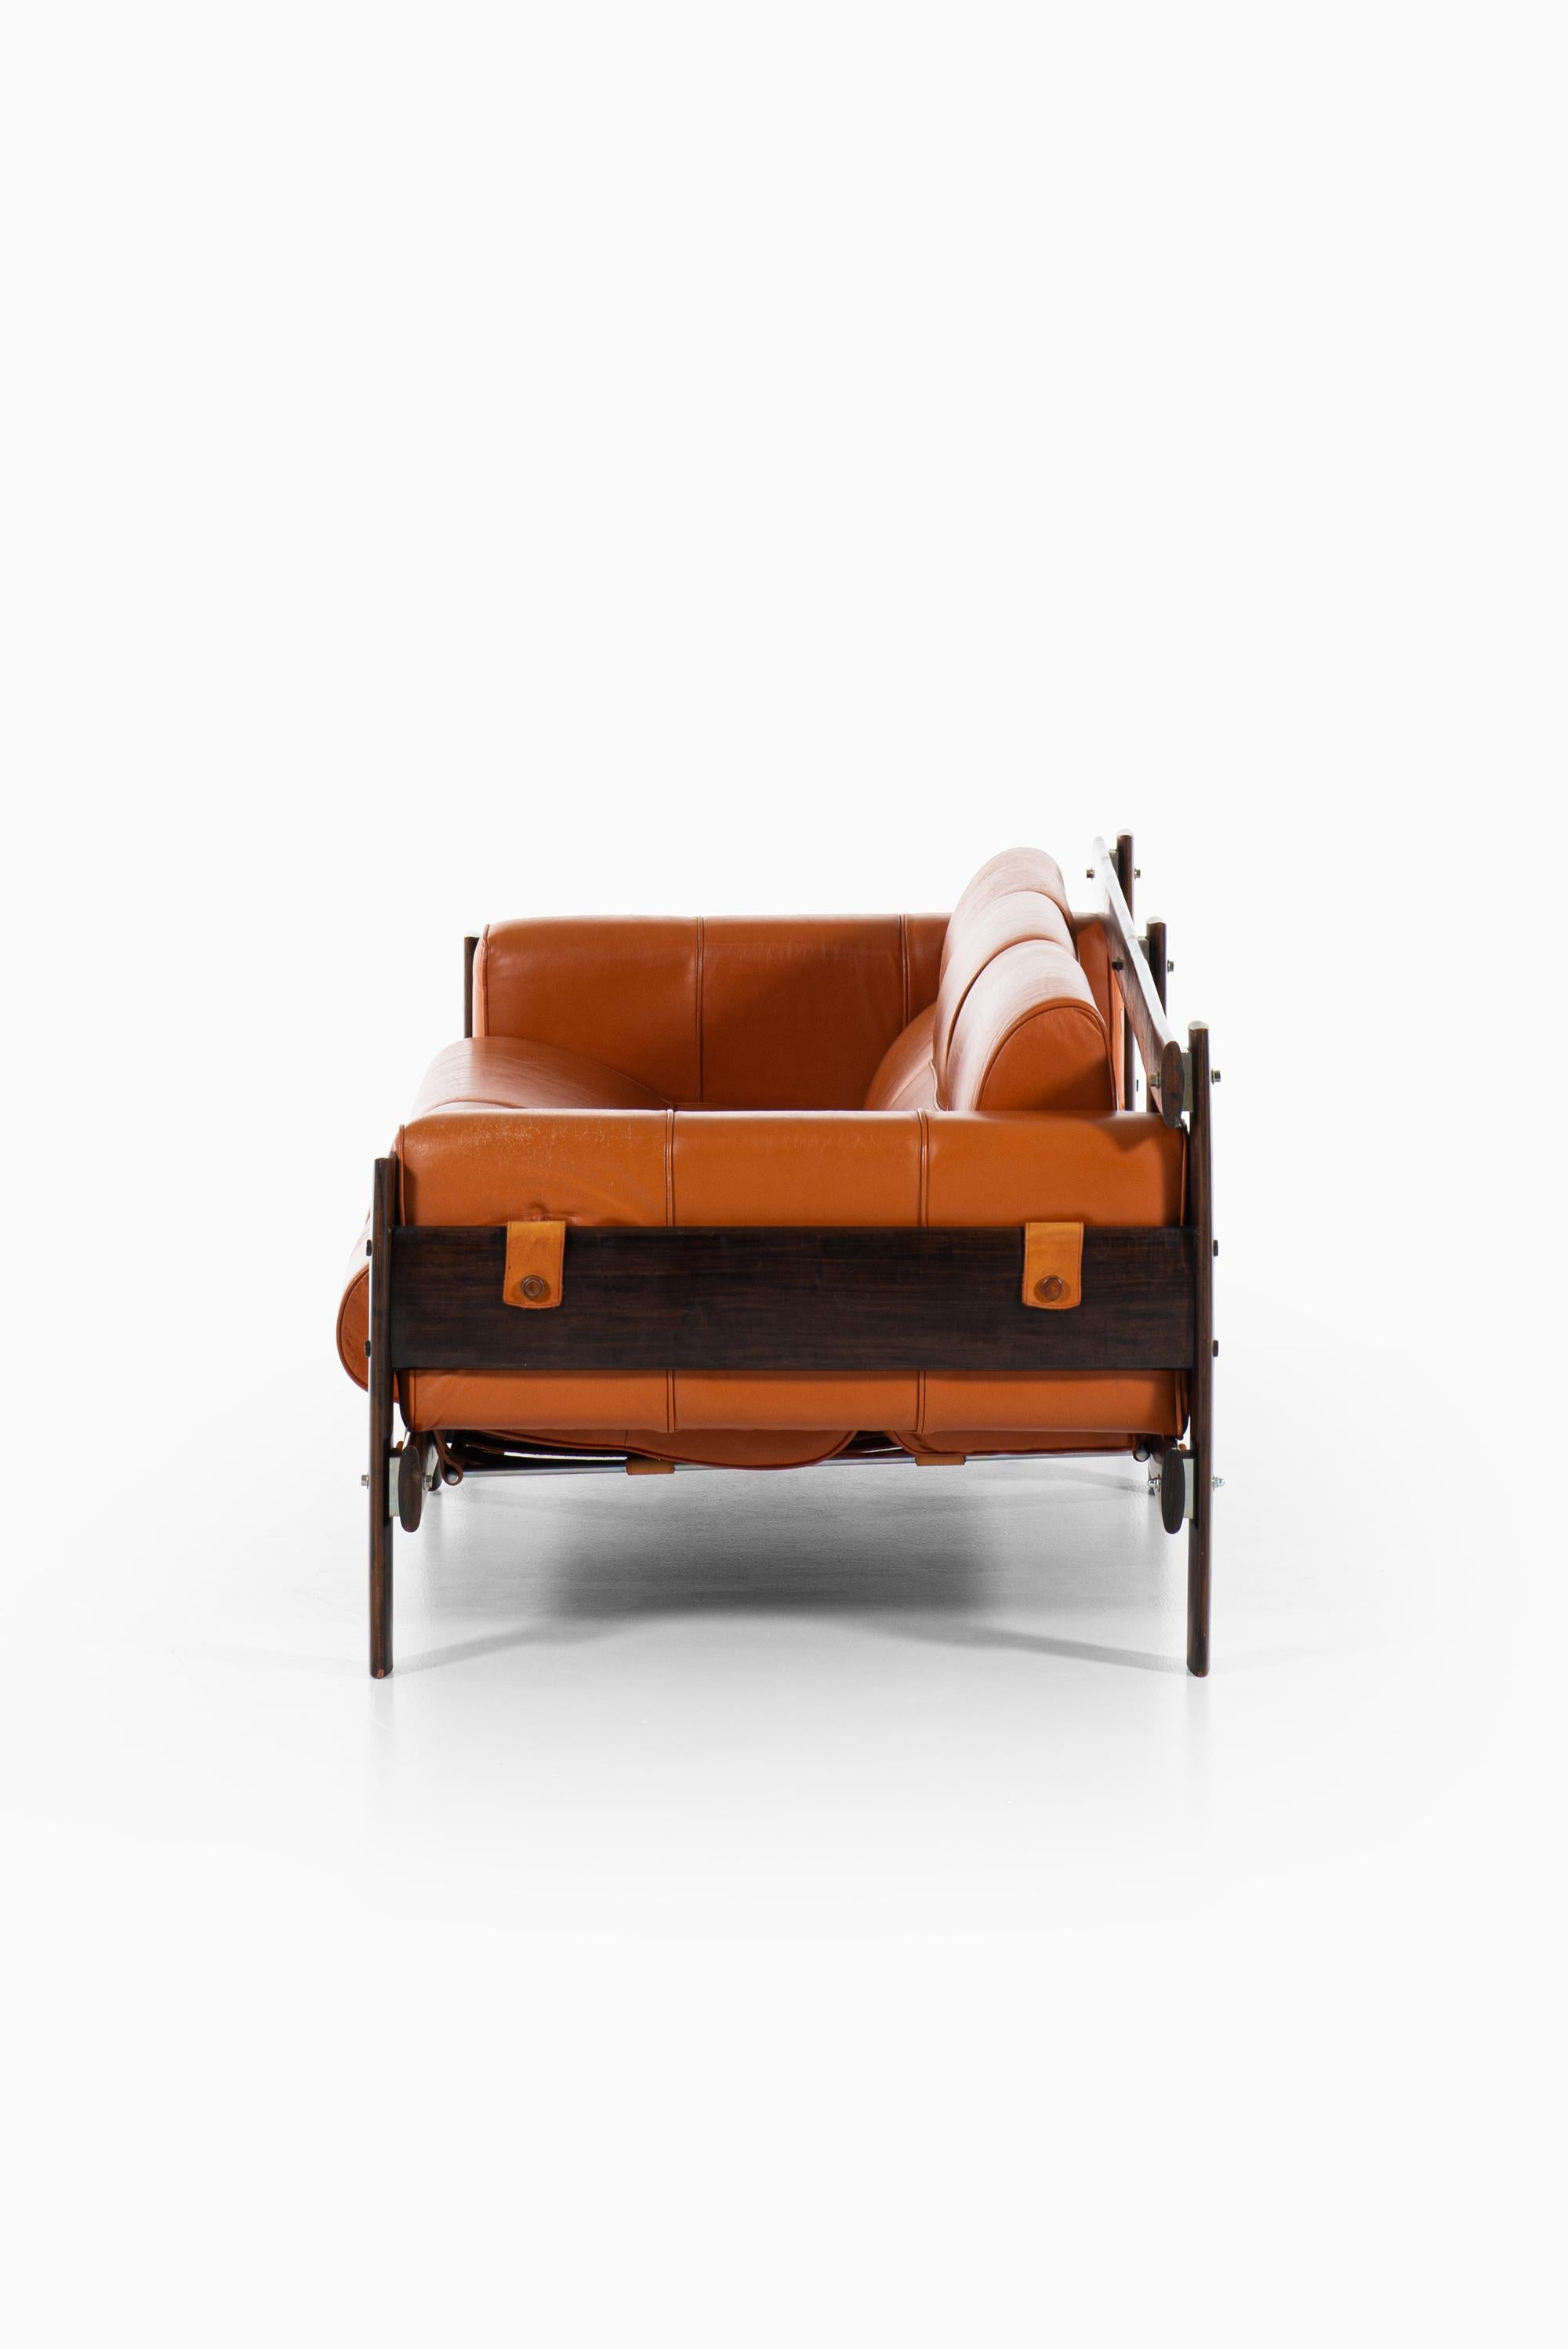 Mid-Century Modern Percival Lafer Sofa in Rosewood and Leather by Lafer MP in Brazil